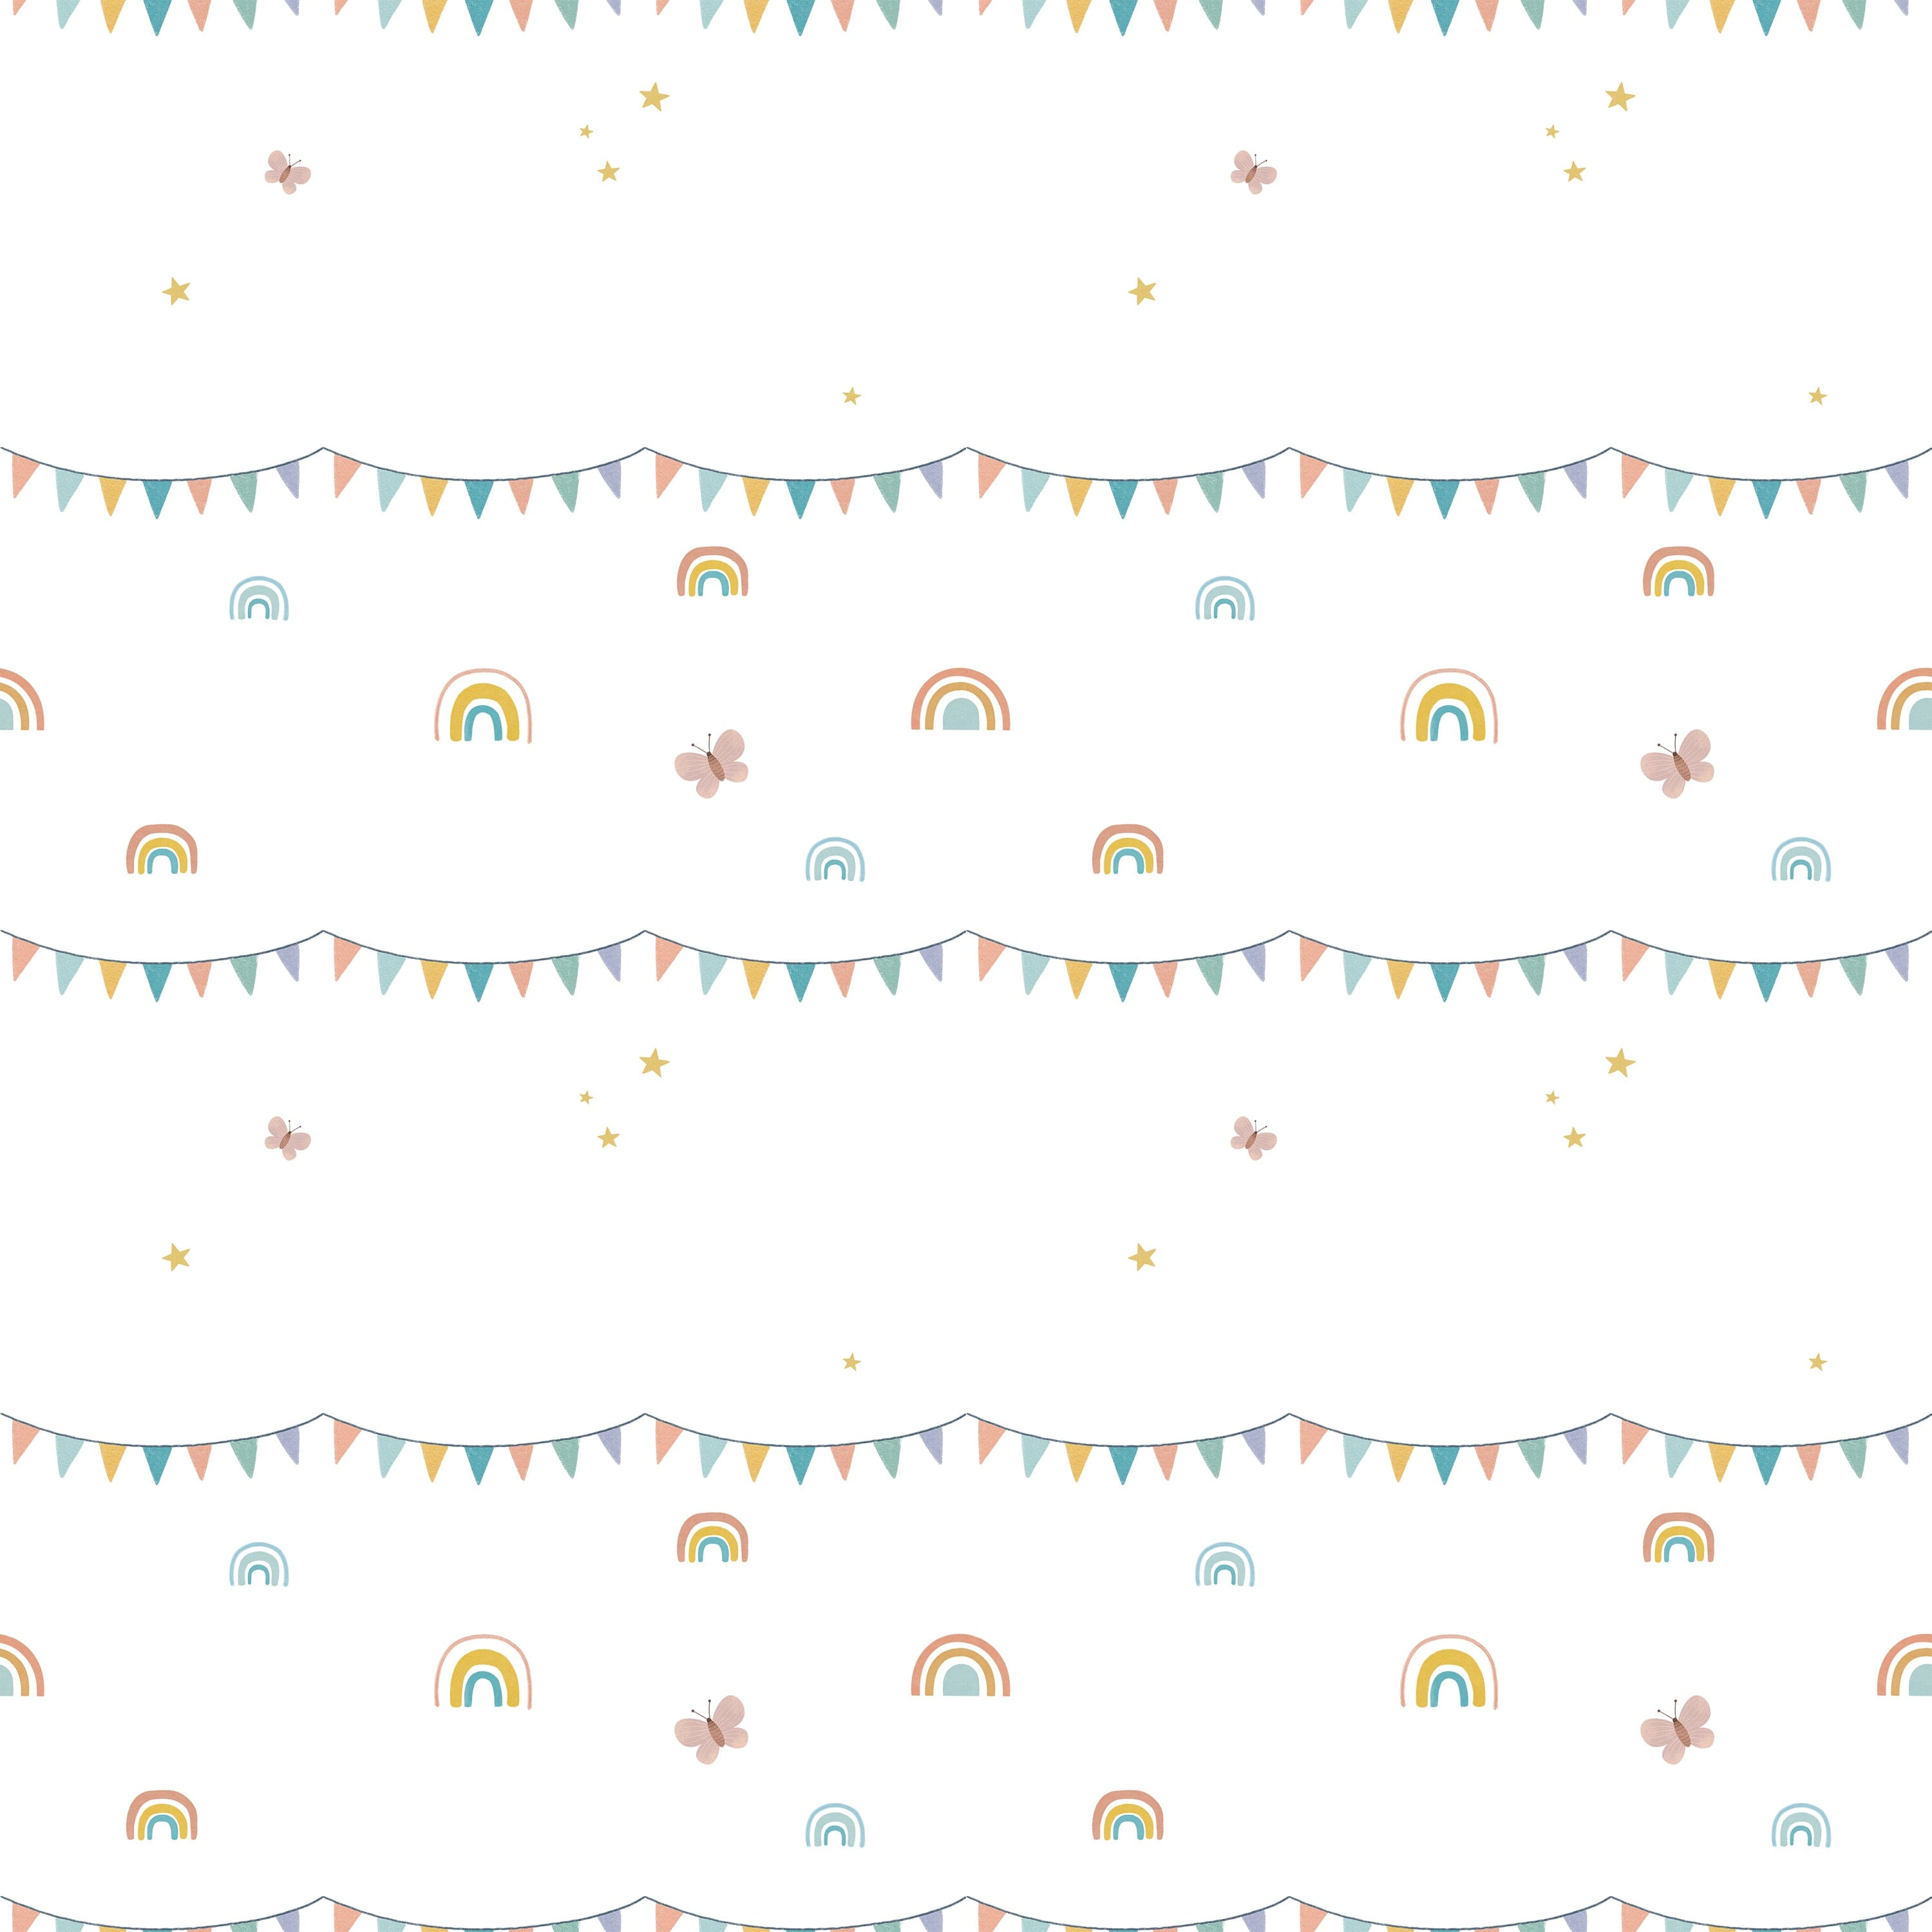 Cheerful and whimsical wallpaper featuring rows of playful elements like pastel rainbows, soft-colored bunting flags, and little stars scattered across a white background, perfect for a child's room